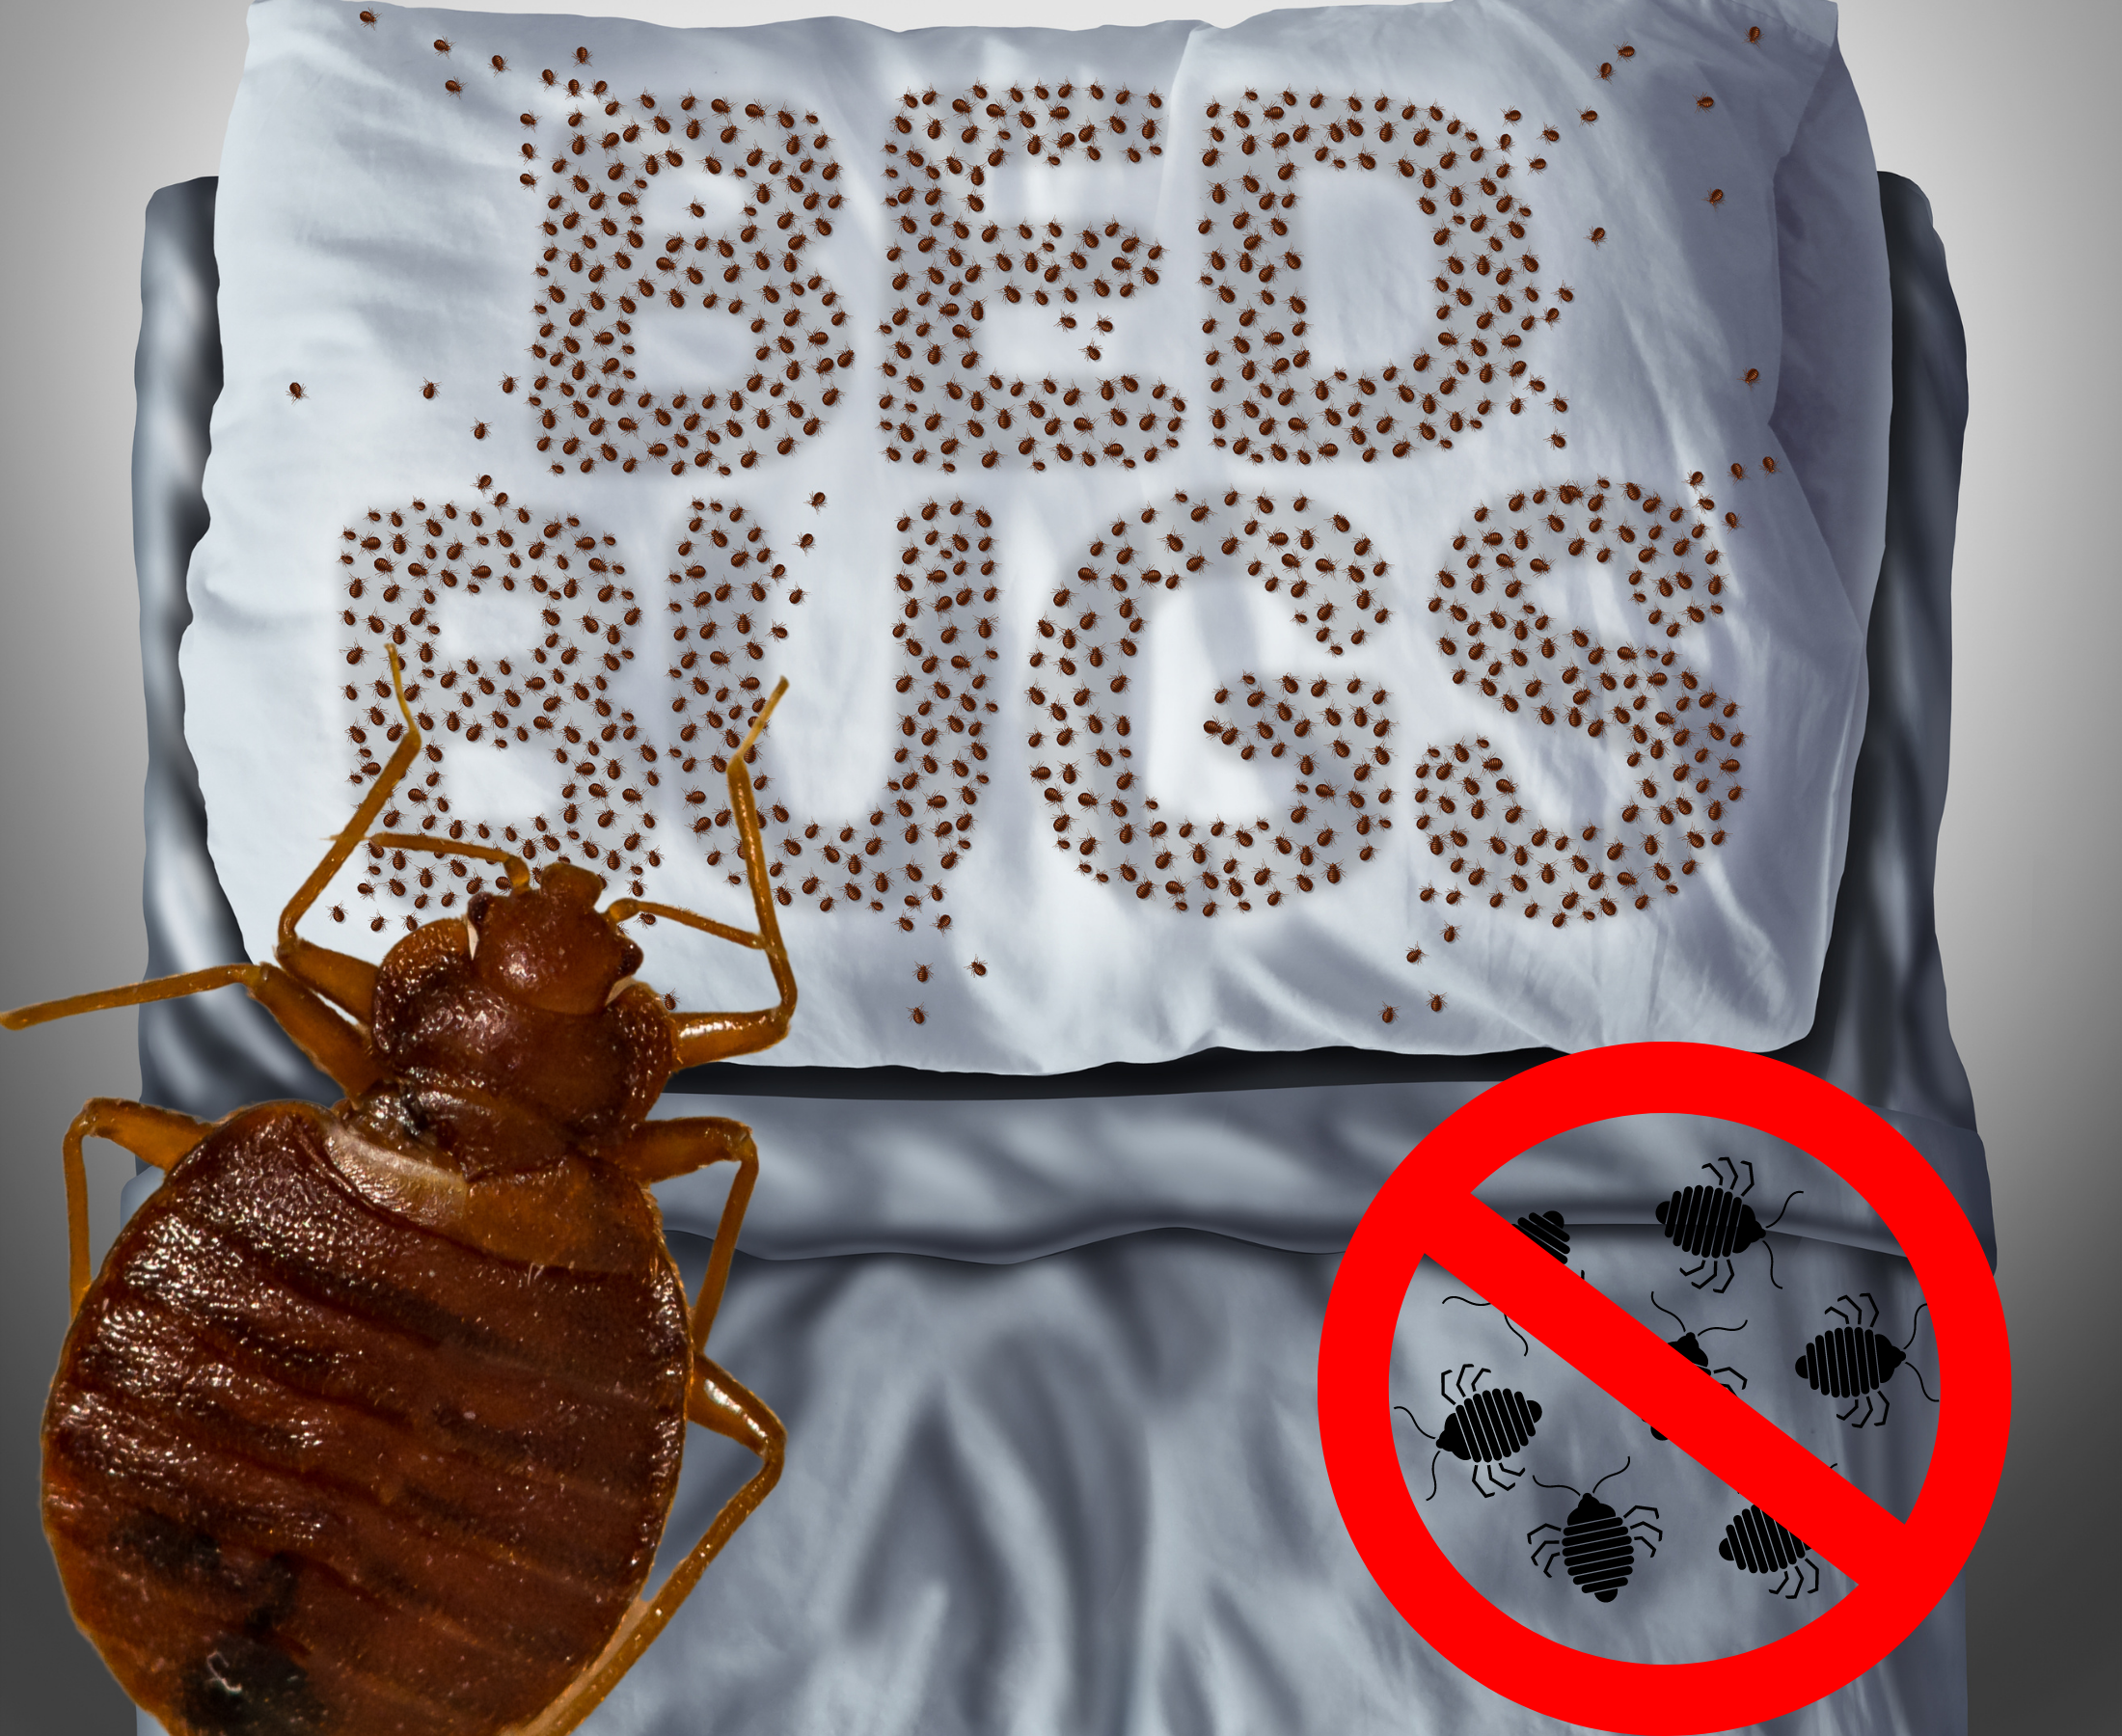 Is bed bug Toxic for health?